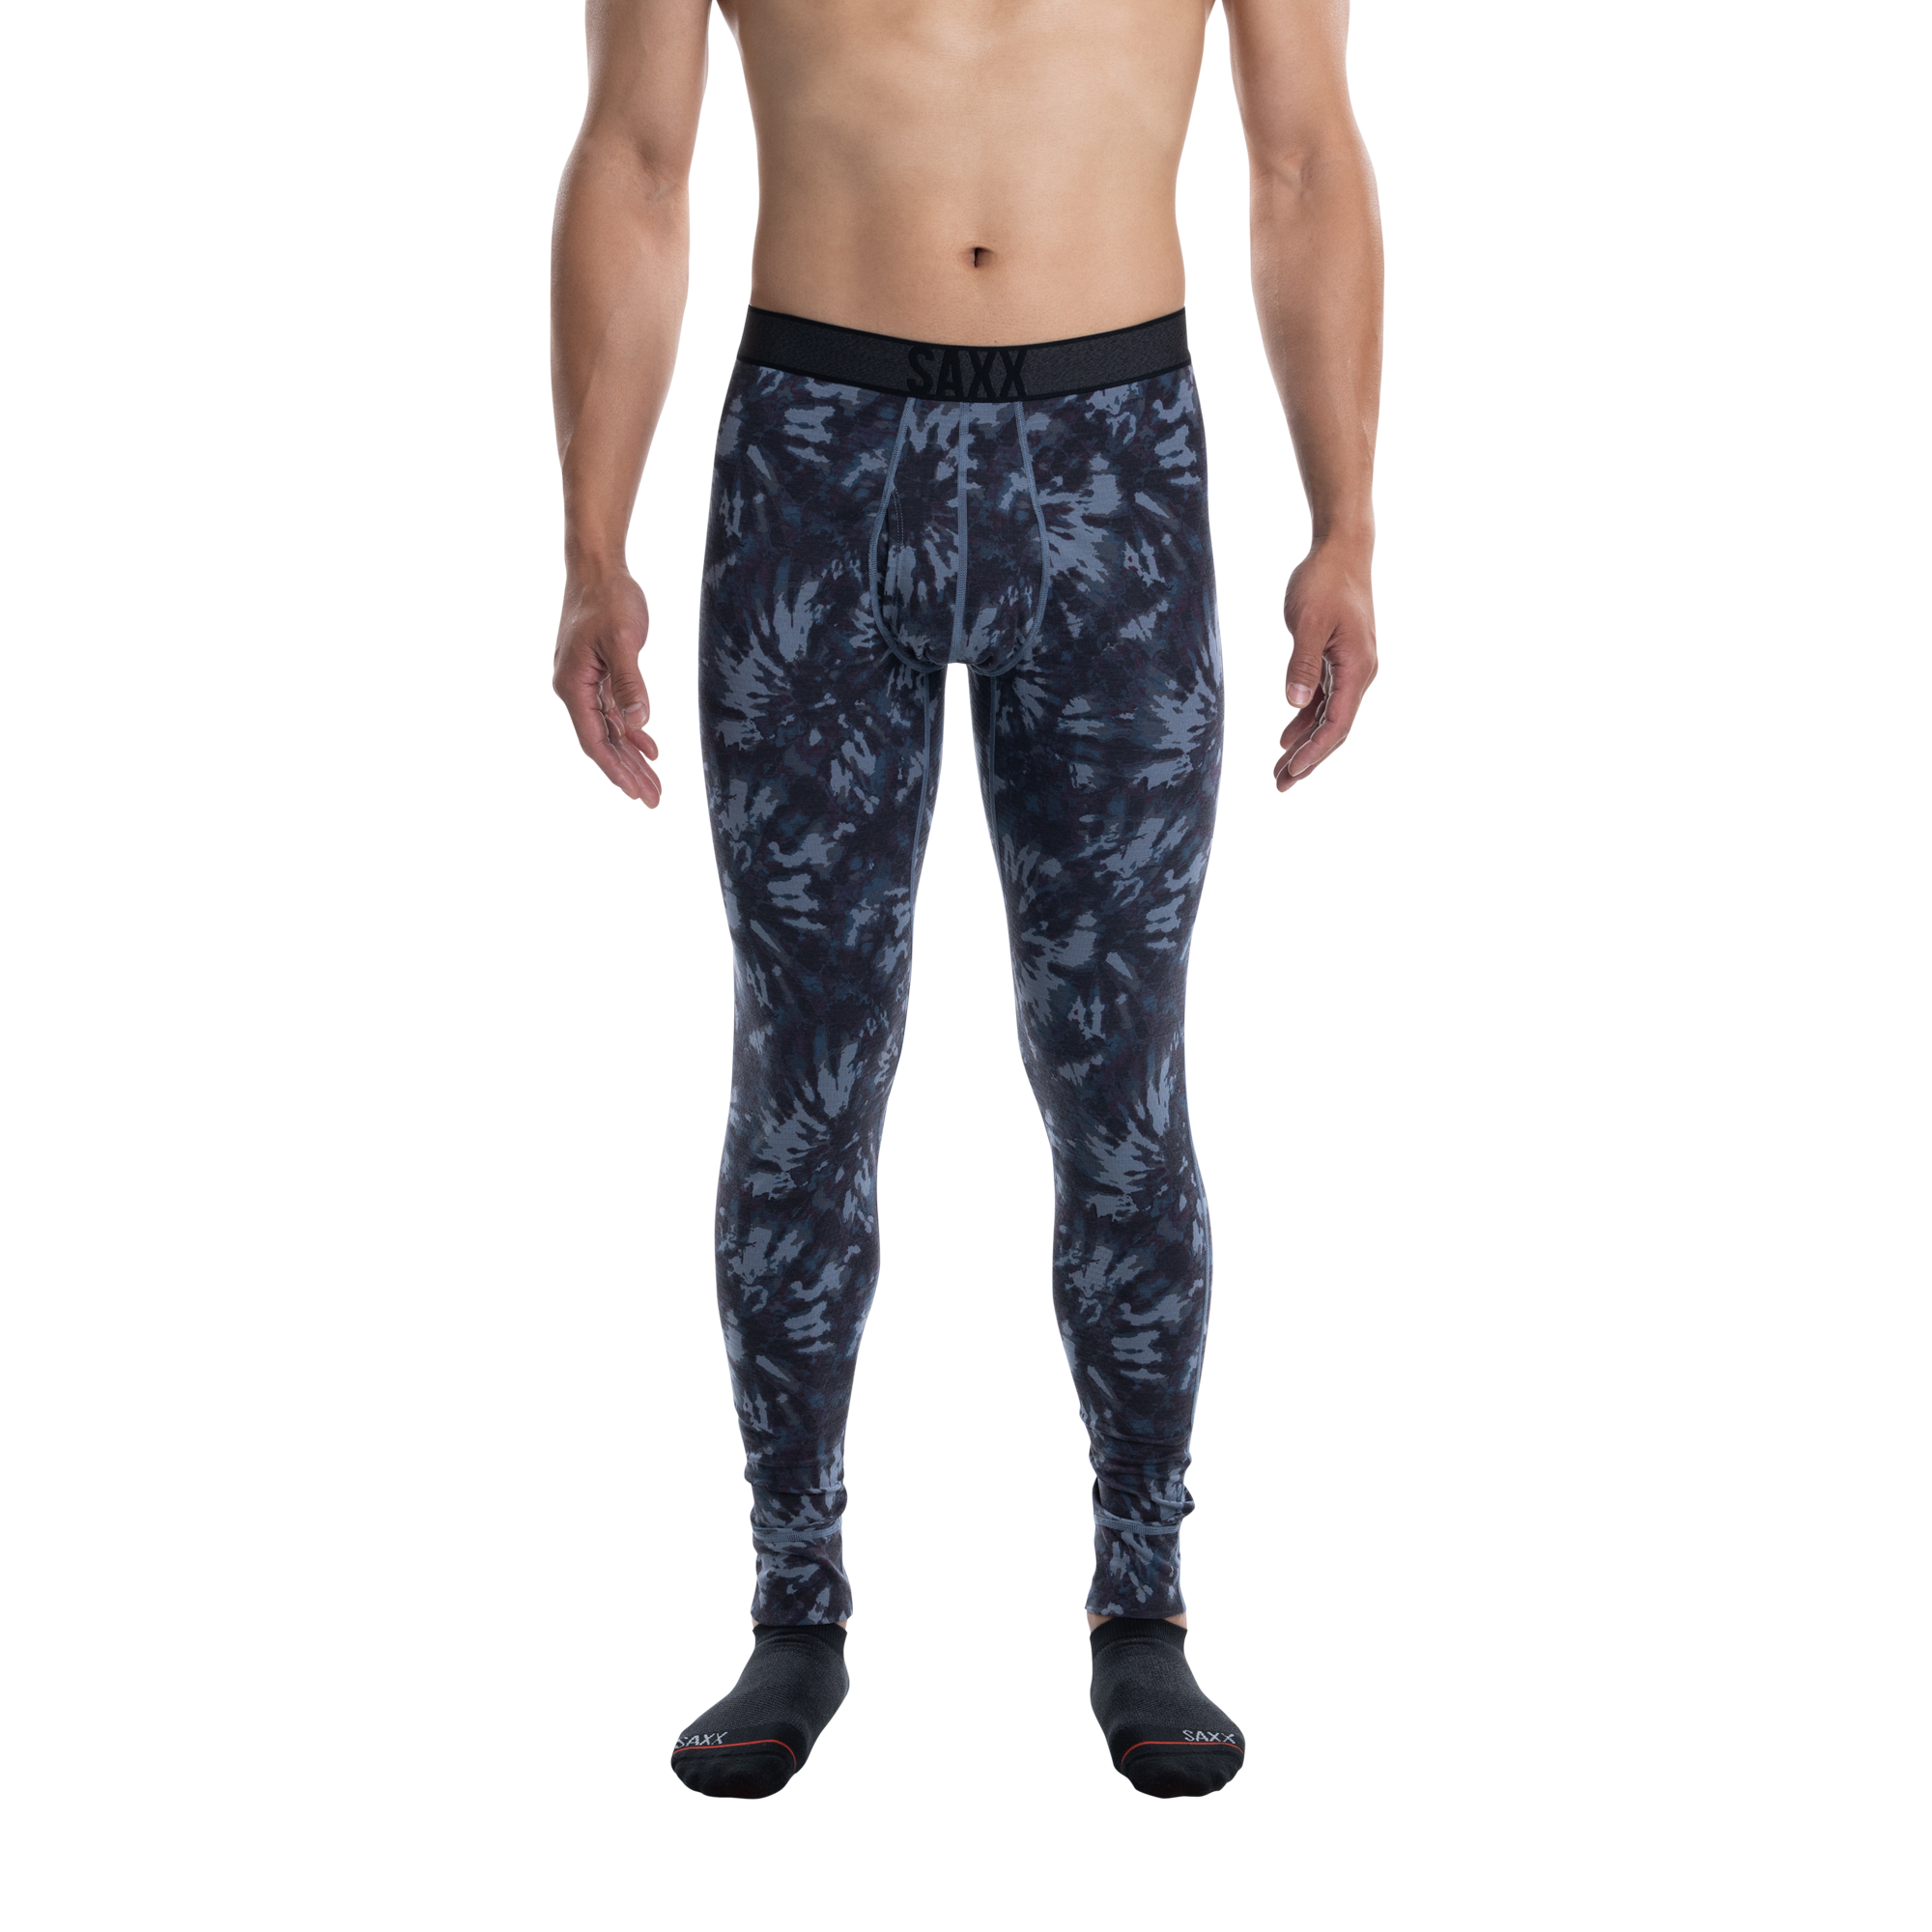 Front - Model wearing Roast Master Mid-Weight Baselayer Tight Fly in Snowburst Tie Dye- Grey